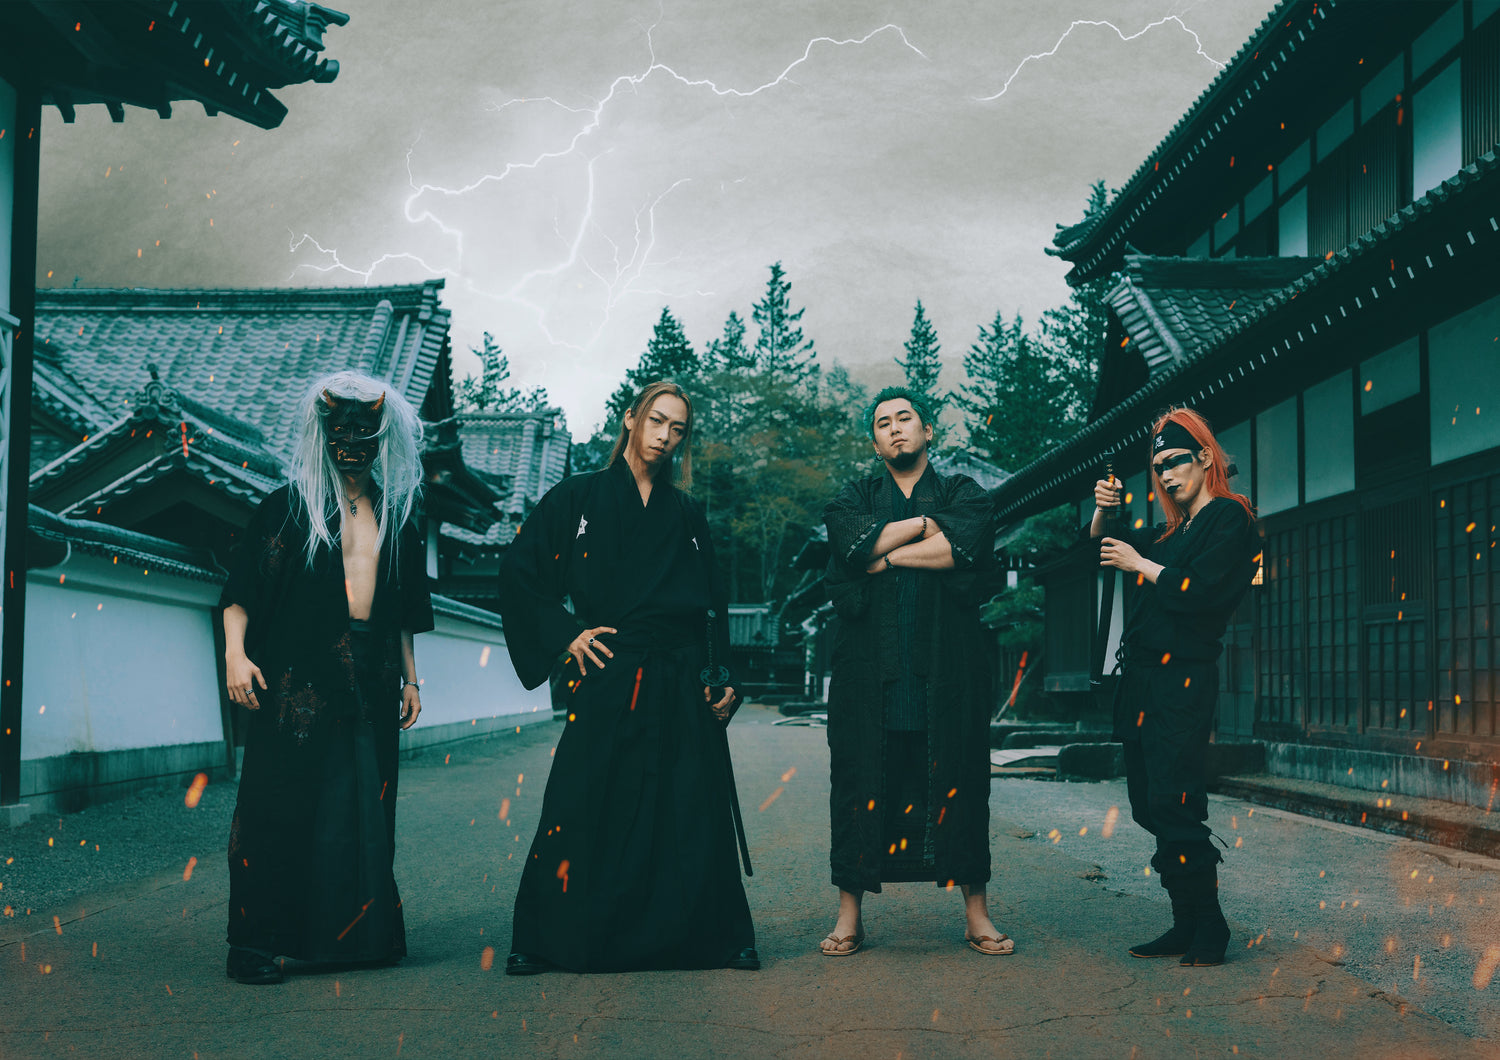 Ryujin Showcase 'Samurai Metal' For the Masses On Their Most Ambitious Release to Date